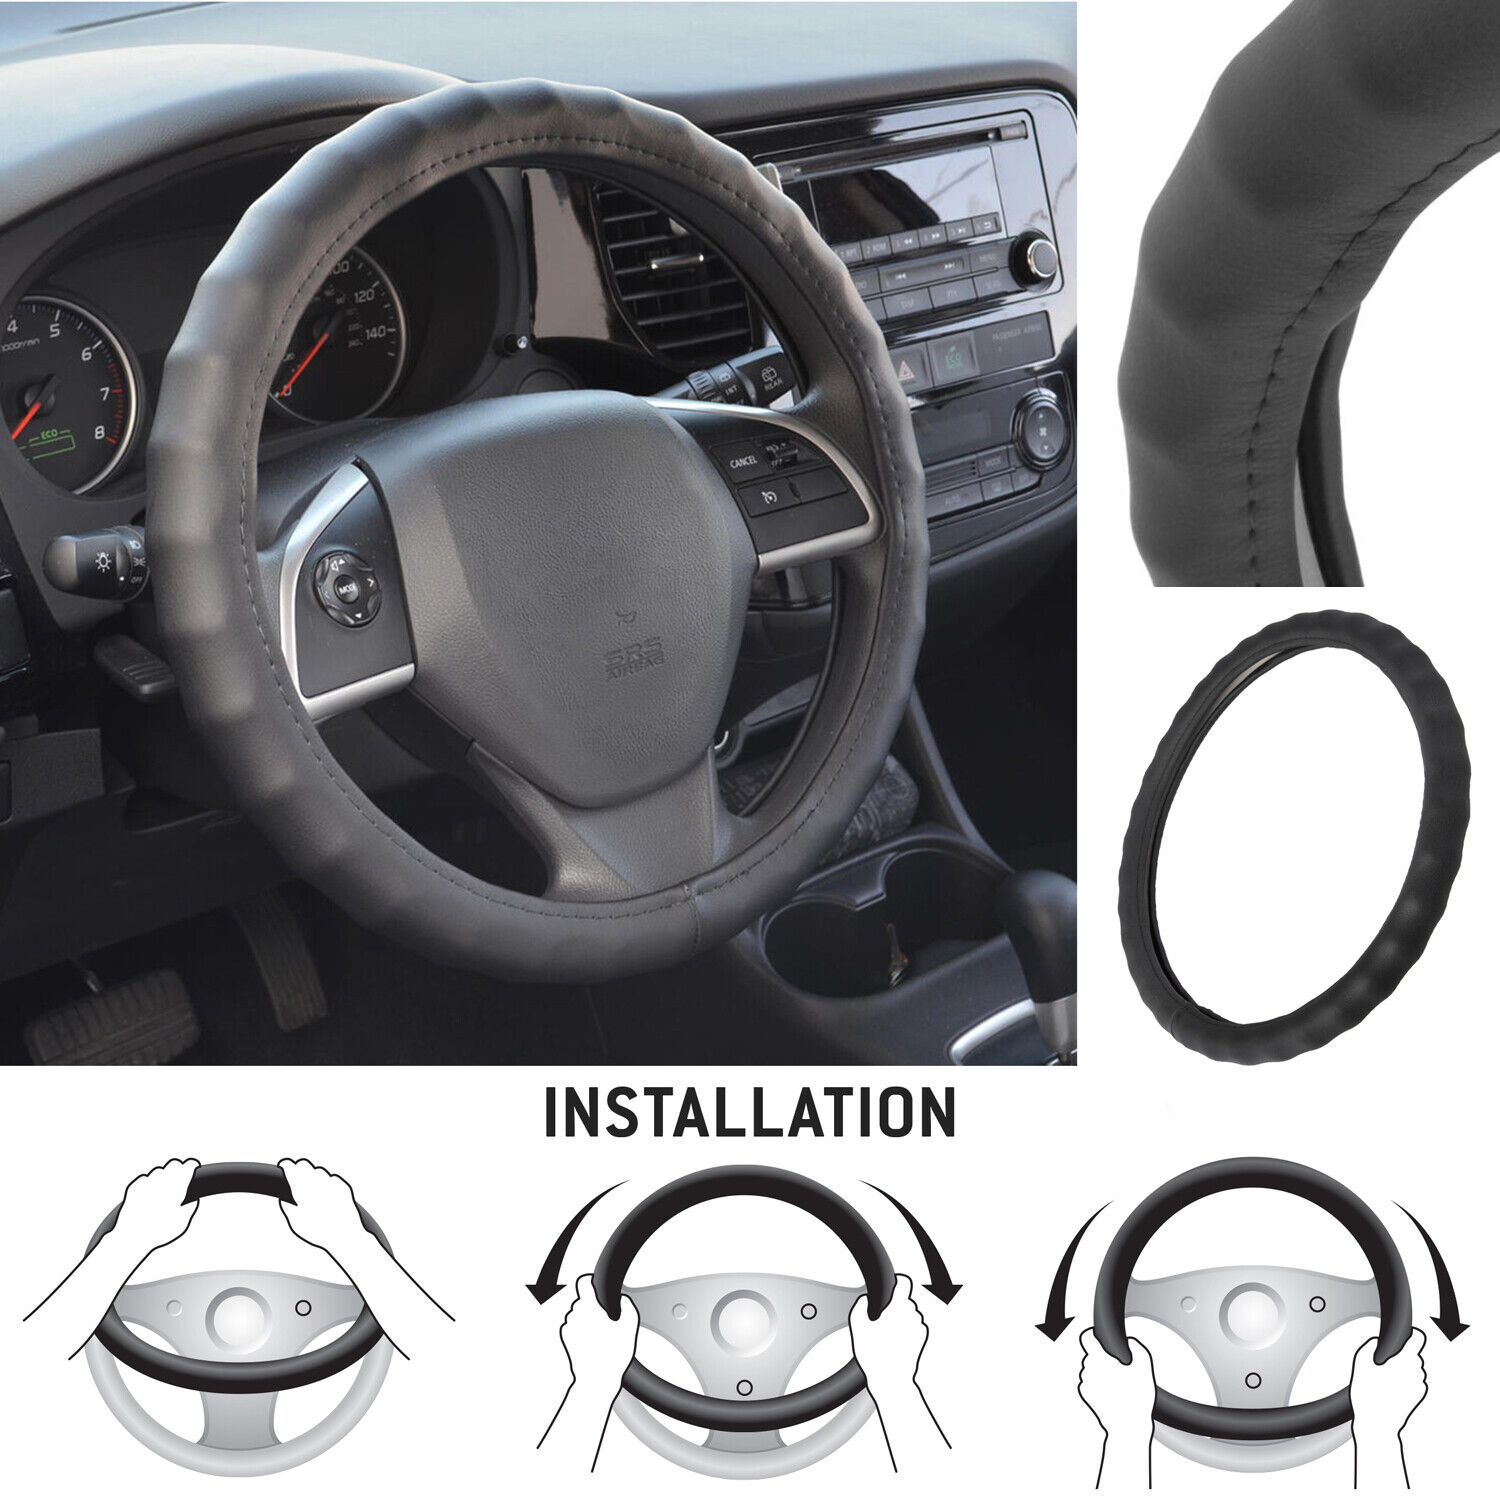 Genuine Leather Steering Wheel Cover for Car SUV Truck Medium 14.5\